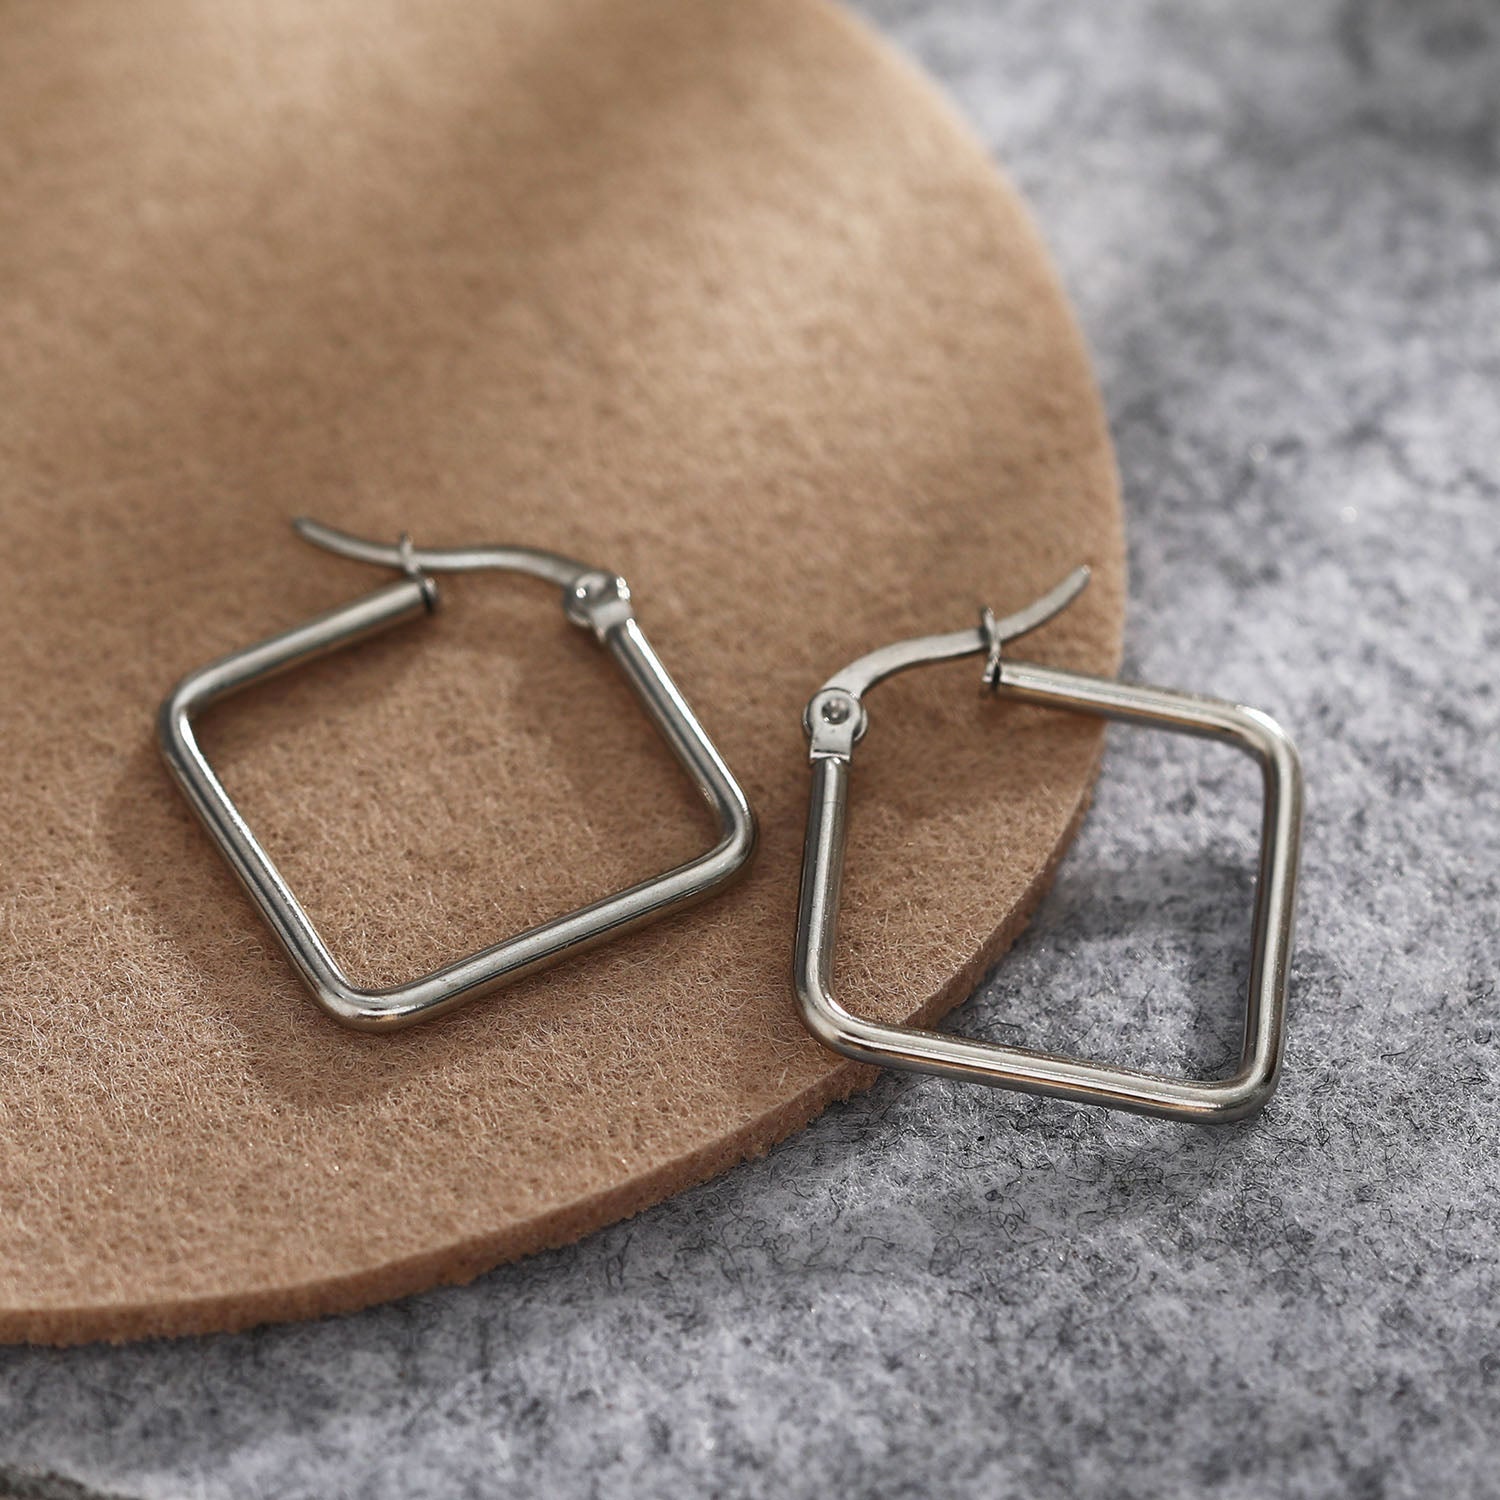 REILYNN Small Square Shaped Hoops. In Gold & Silver.